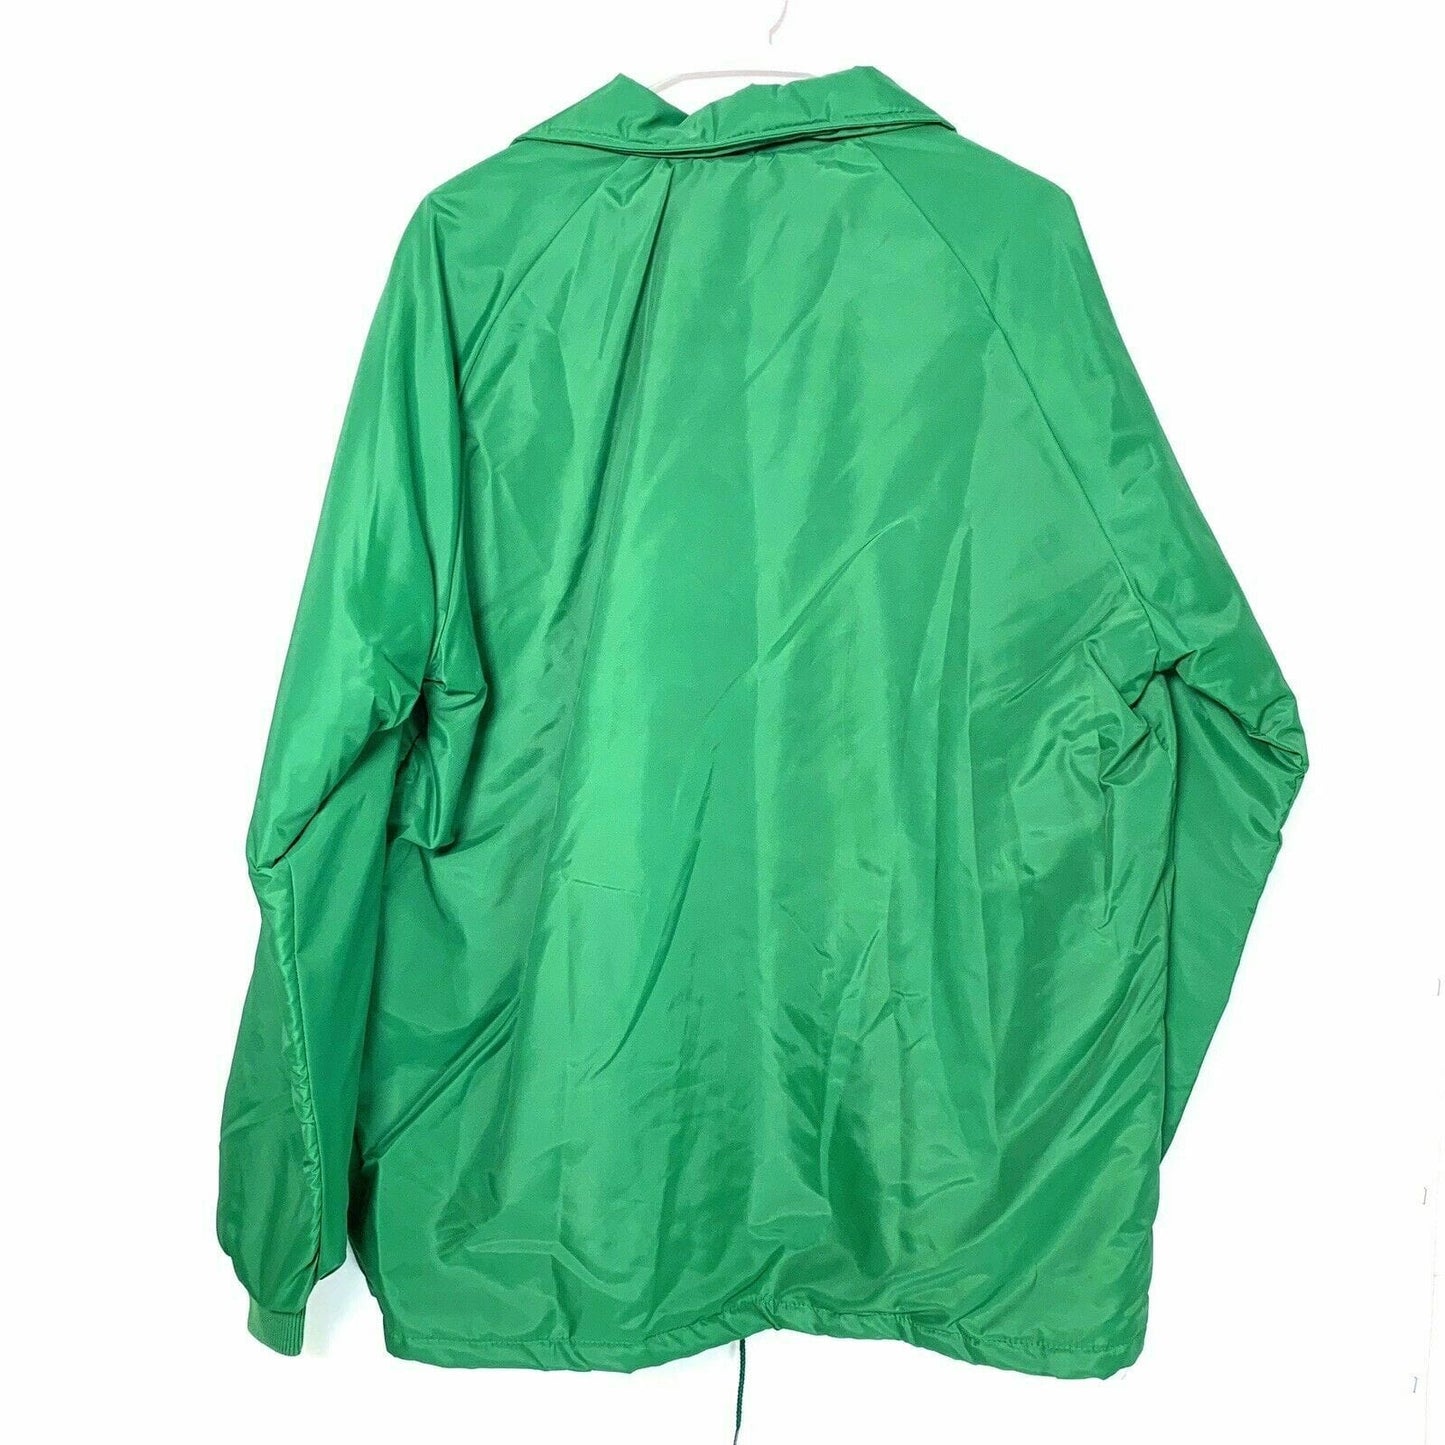 Vintage Swingster Pioneer Seed Lined Jacket, Green - Size L - parsimonyshoppes